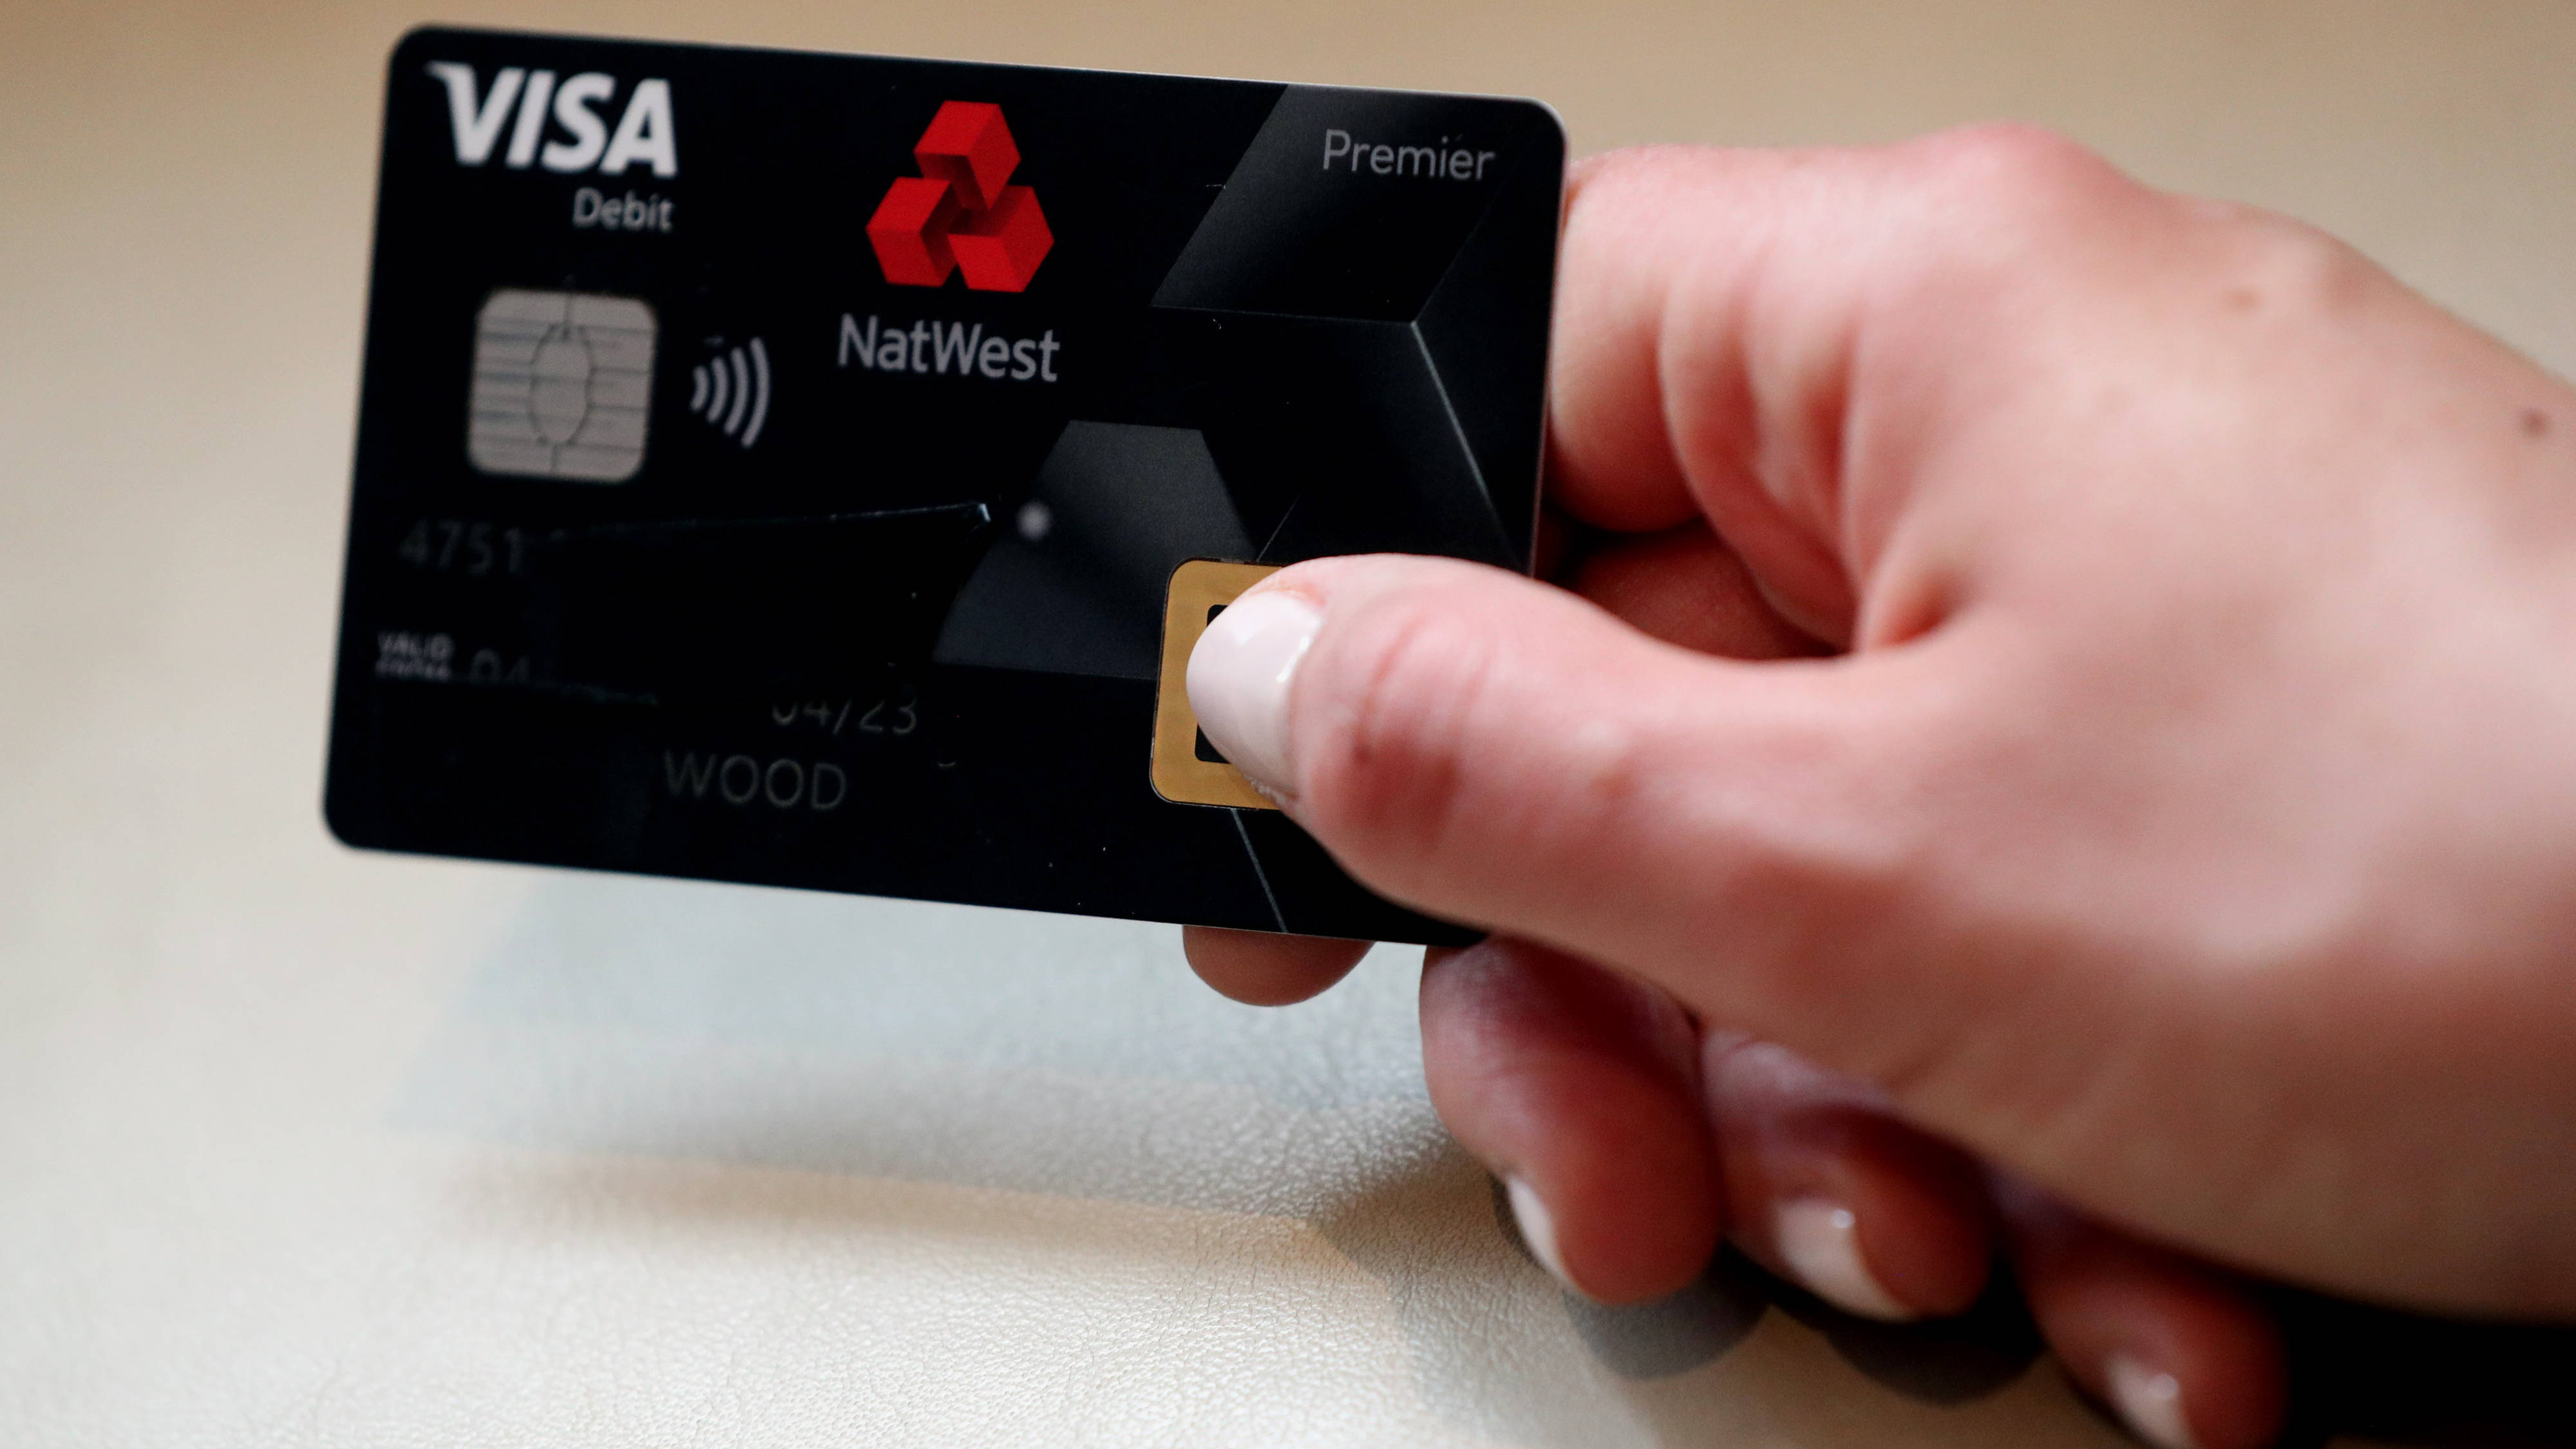 Natwest And Rbs Customers Unable To Access Their Accounts Due To